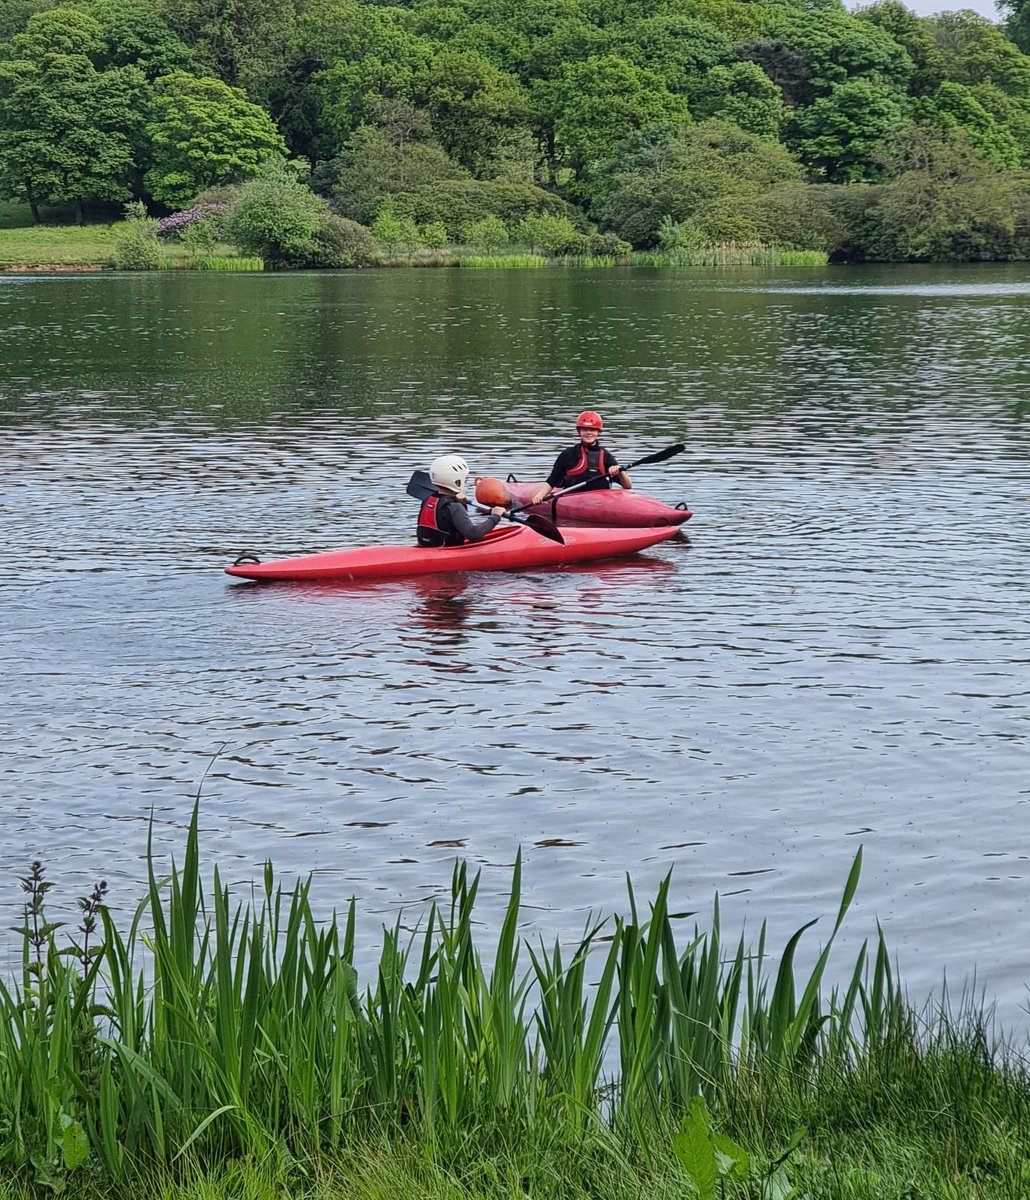 📢 Boating Update - Monday 24 July 2023 Emails have been sent to all Parents/Guardians regarding Monday 24 July 2023. Please ensure you complete the Google Form as soon as possible to confirm attendance / use of minibus etc. Any questions, please email boating@sthelenssc294.co.uk